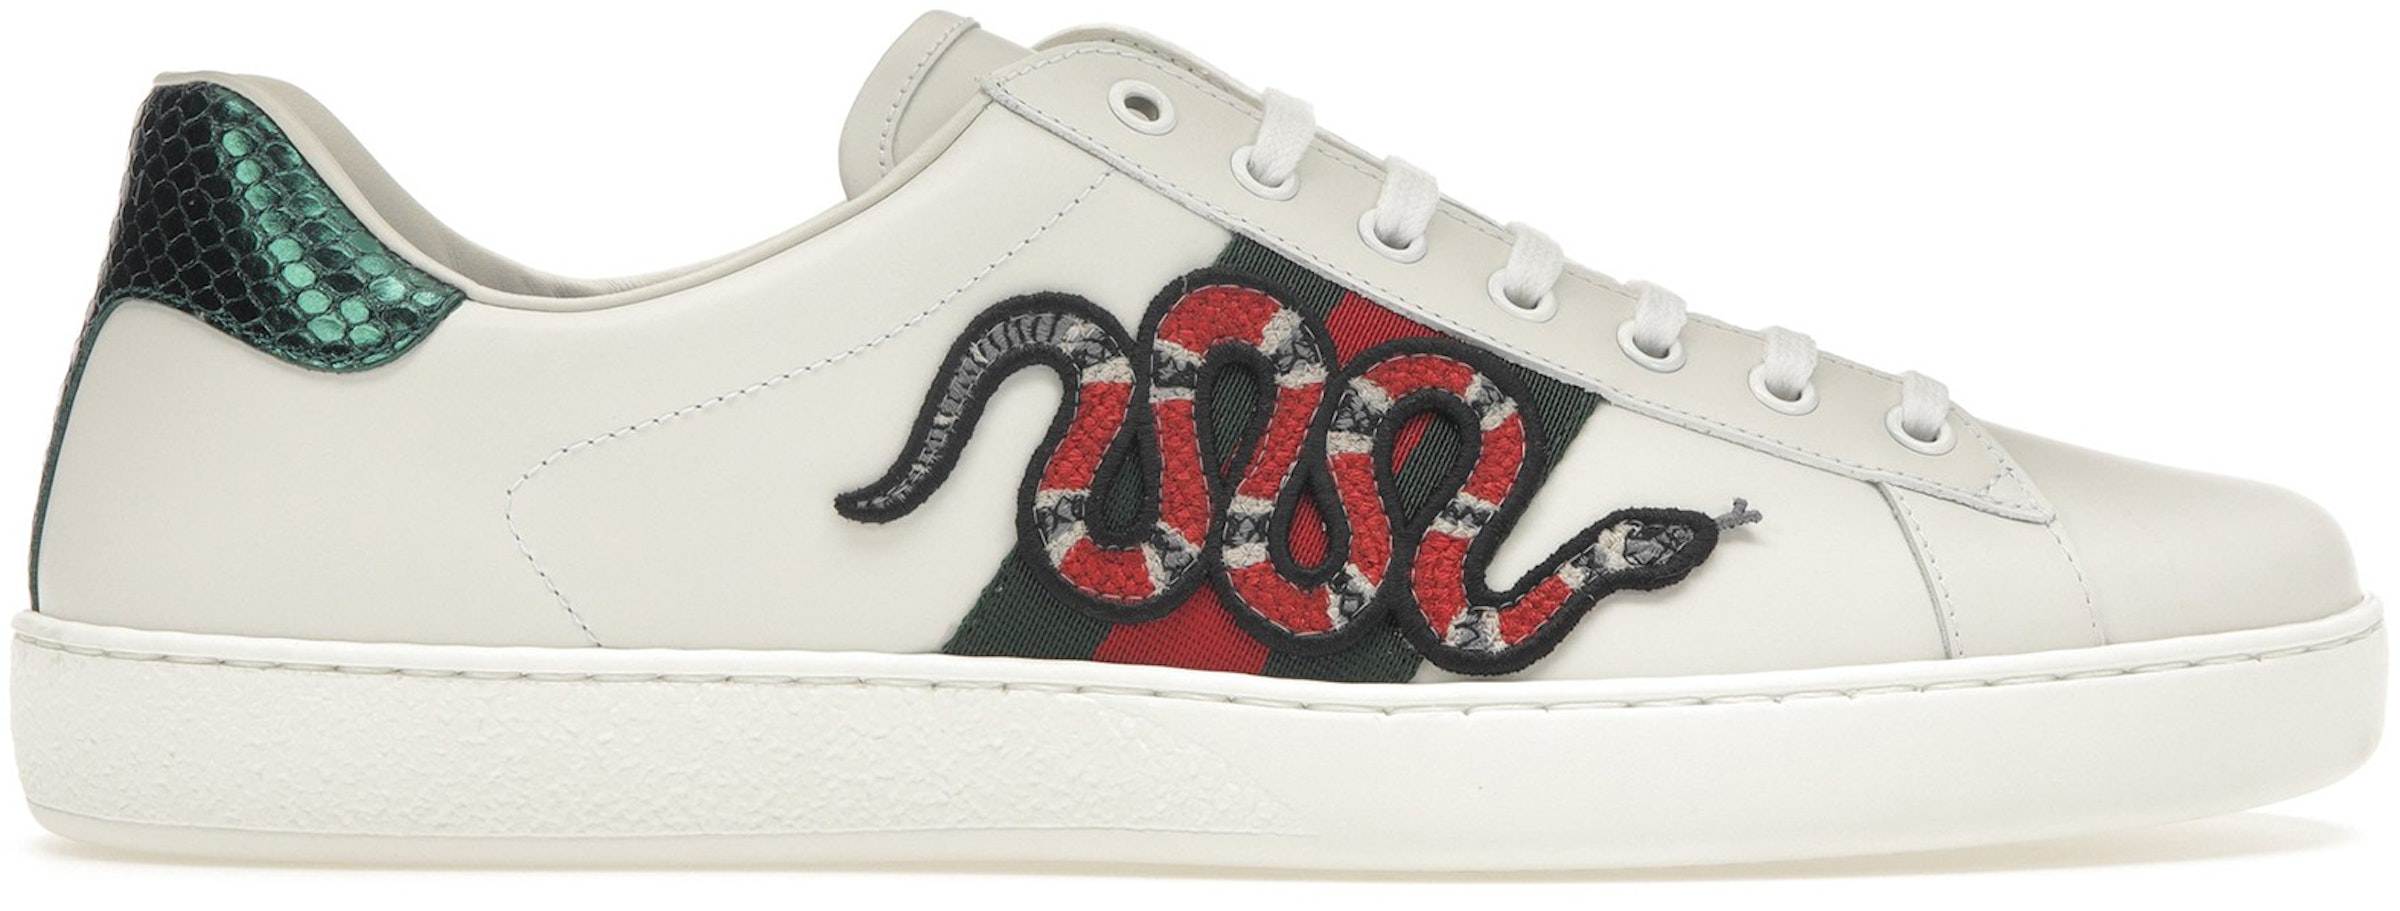 Gucci Ace Embroidered Snake - 456230 A38G0 9064 - US